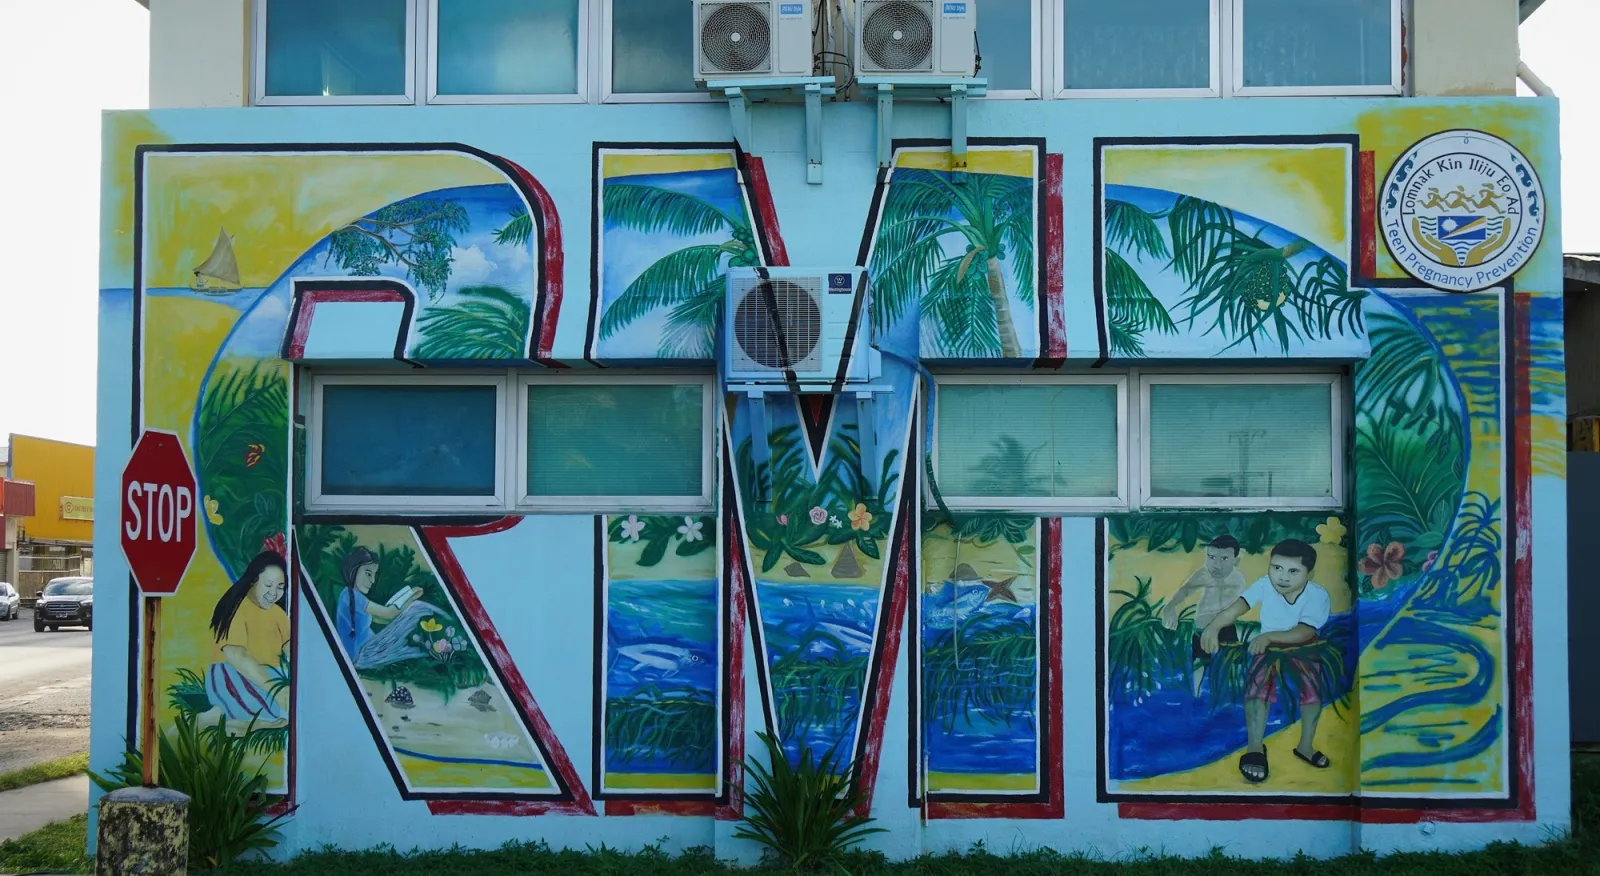 Street art on a building. The letters R-M-I are painted on a wall, the letters are full of palm leaves and surf.